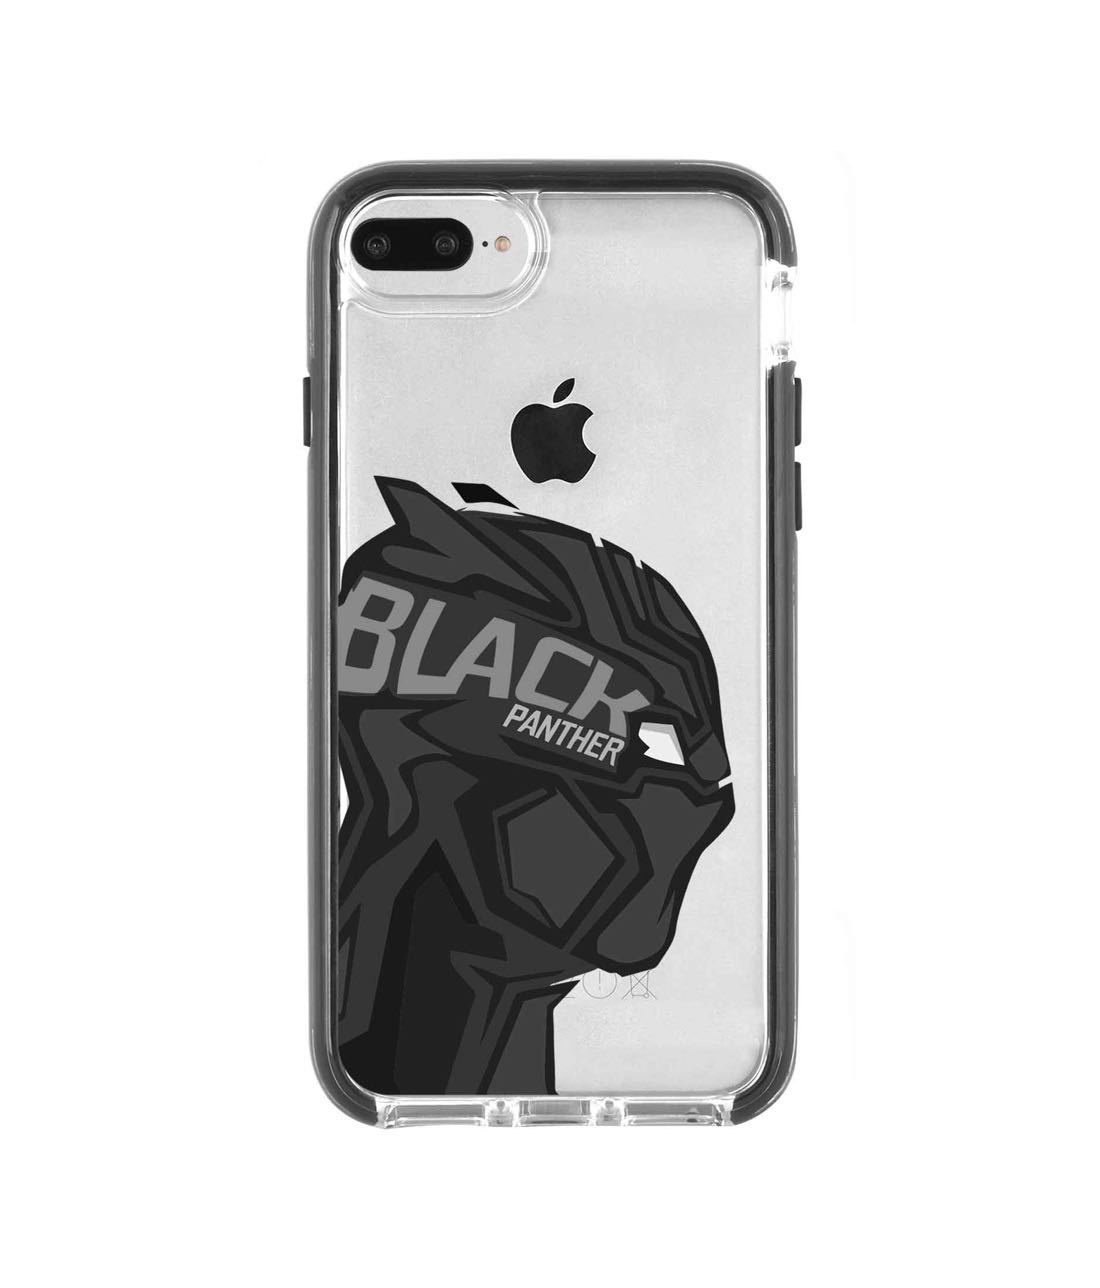 Black Panther Art - Extreme Phone Case for iPhone 8 Plus